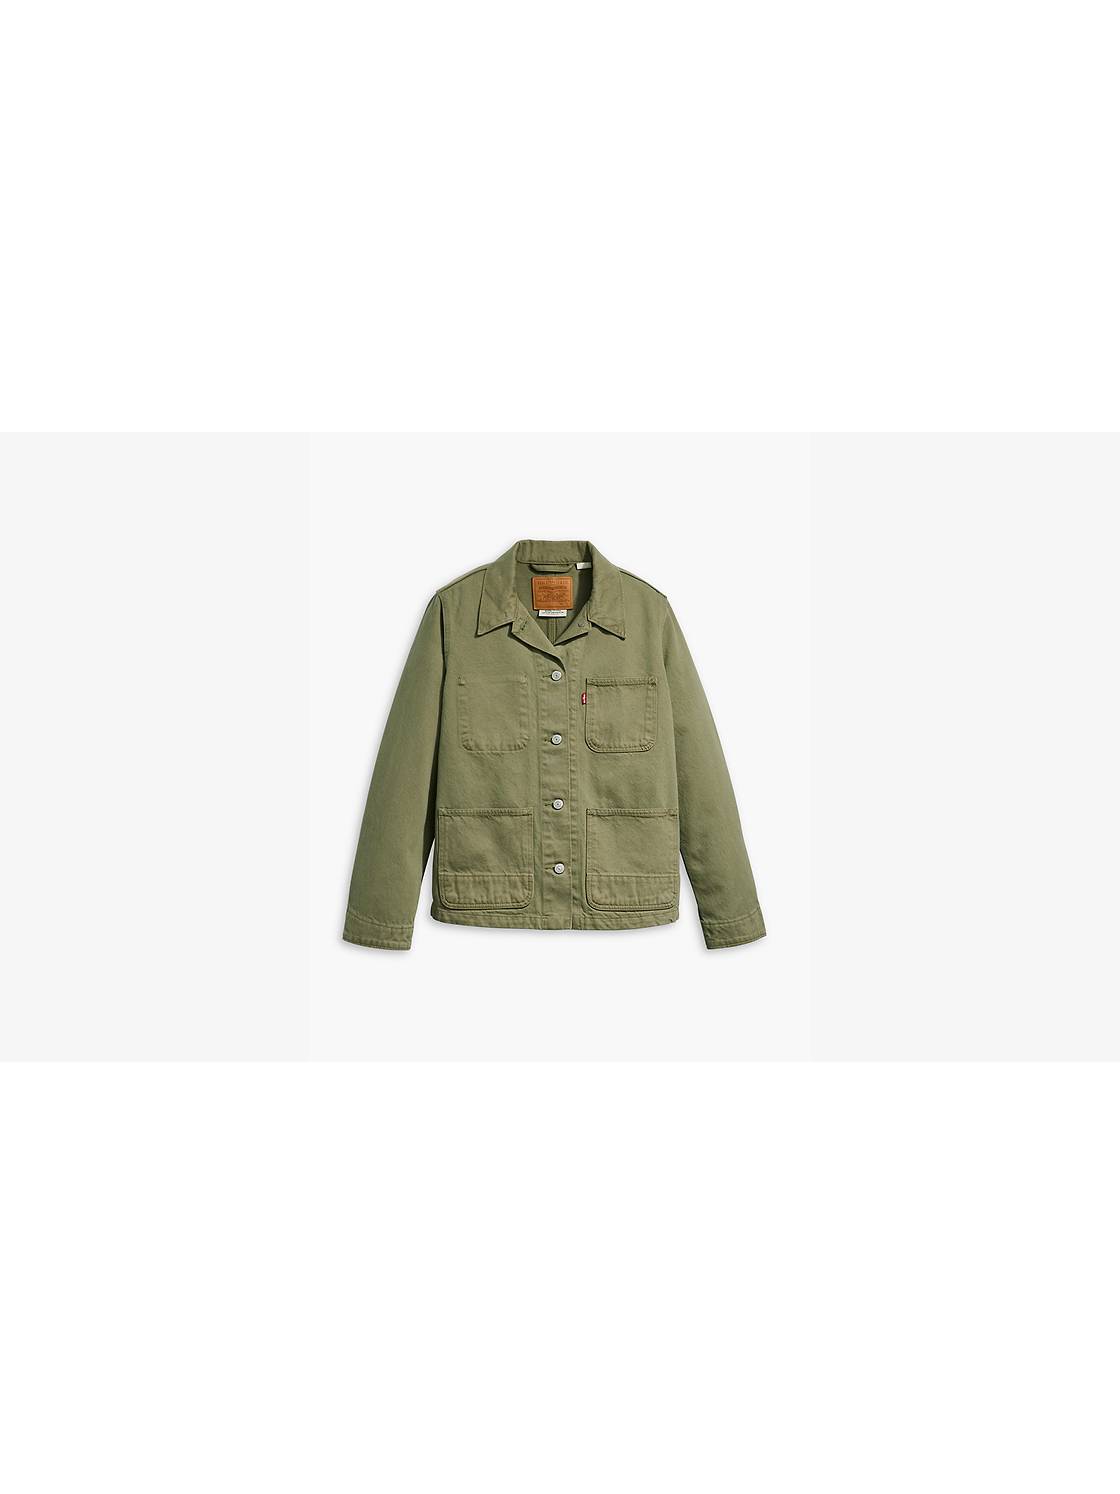 Levi's Onion Quilted Liner Jacket - Women's - Olive Tree XL